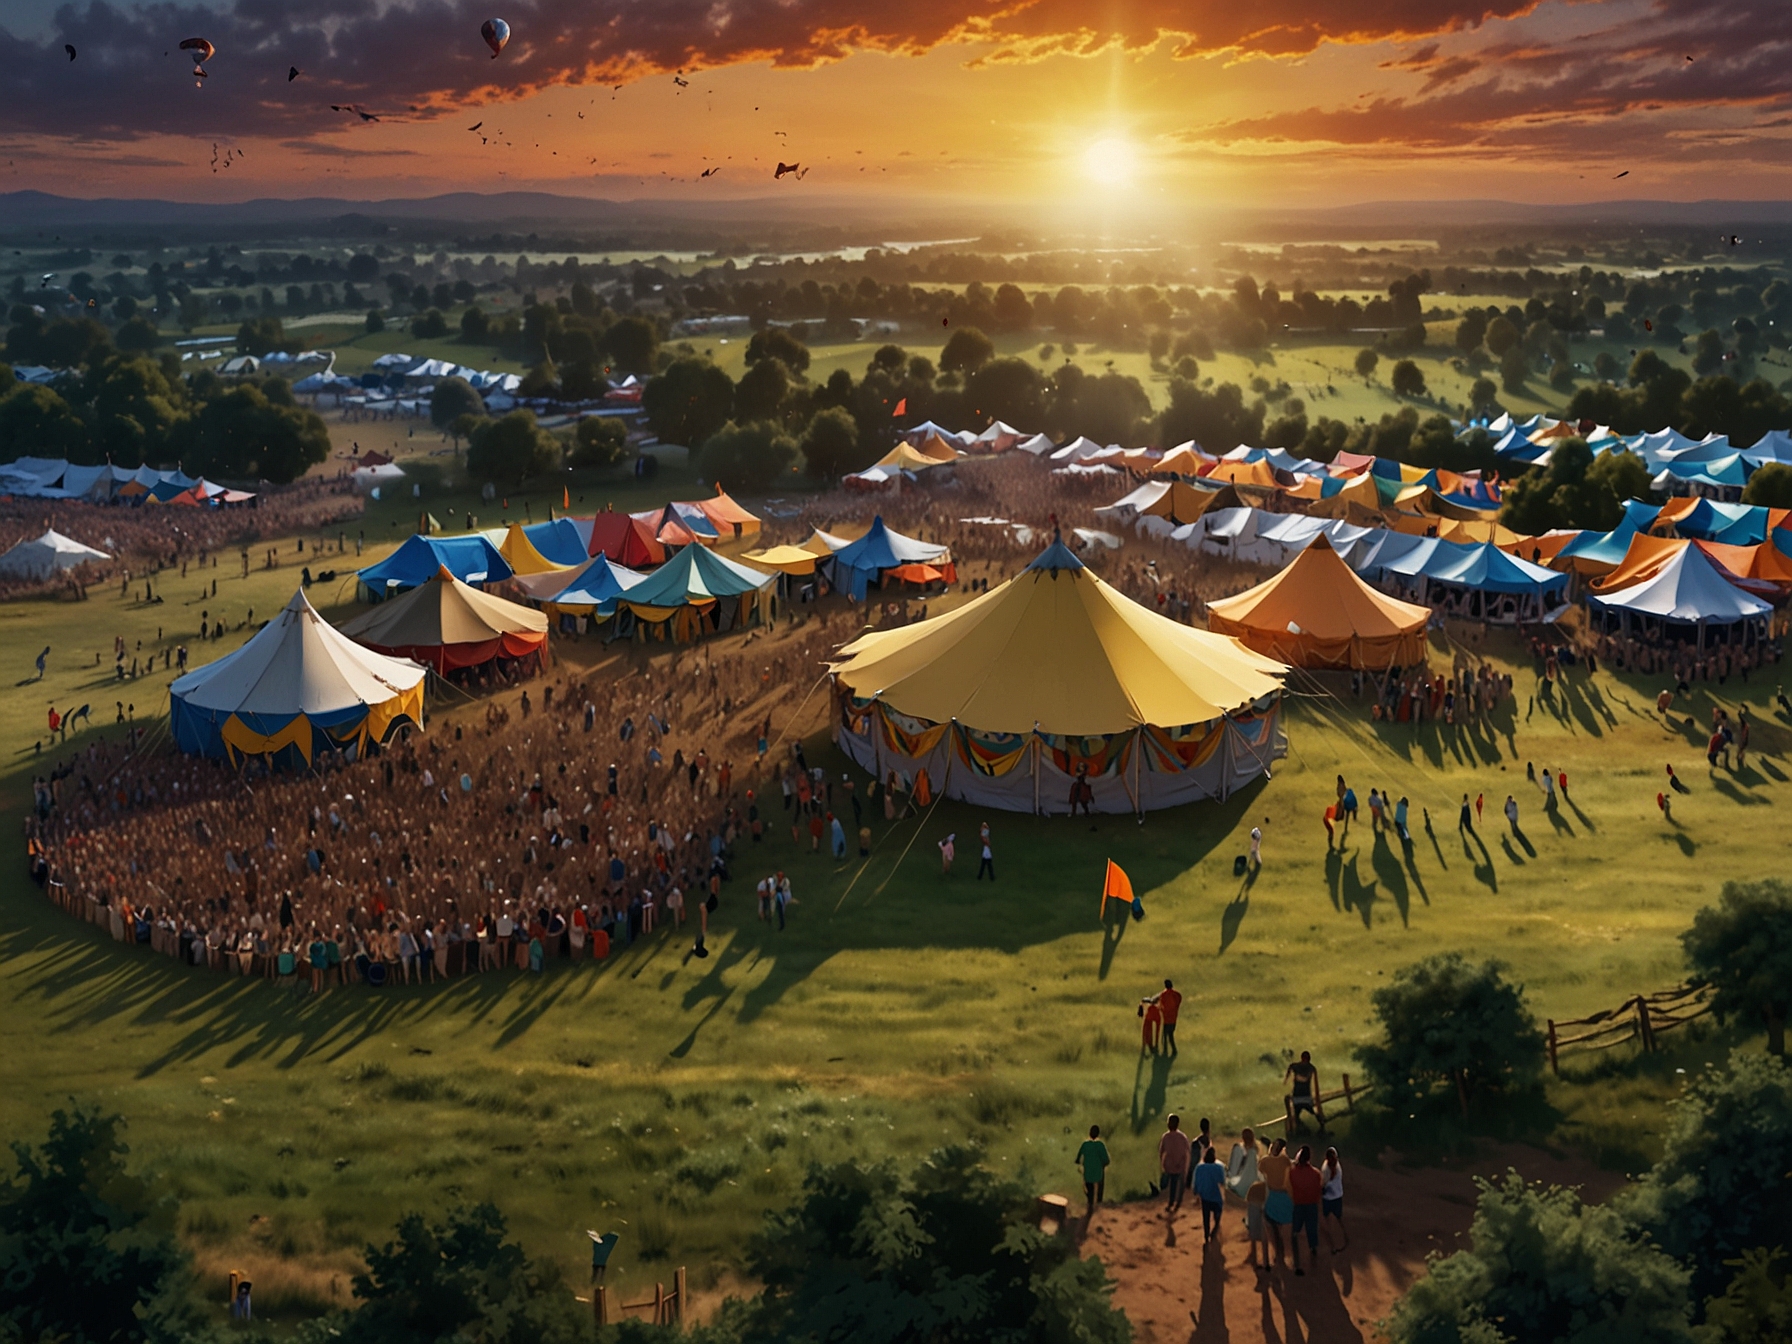 A bird's-eye view of the Glastonbury Festival grounds at Worthy Farm, showcasing the massive crowd of attendees, colorful tents, and multiple stages set up for performances.